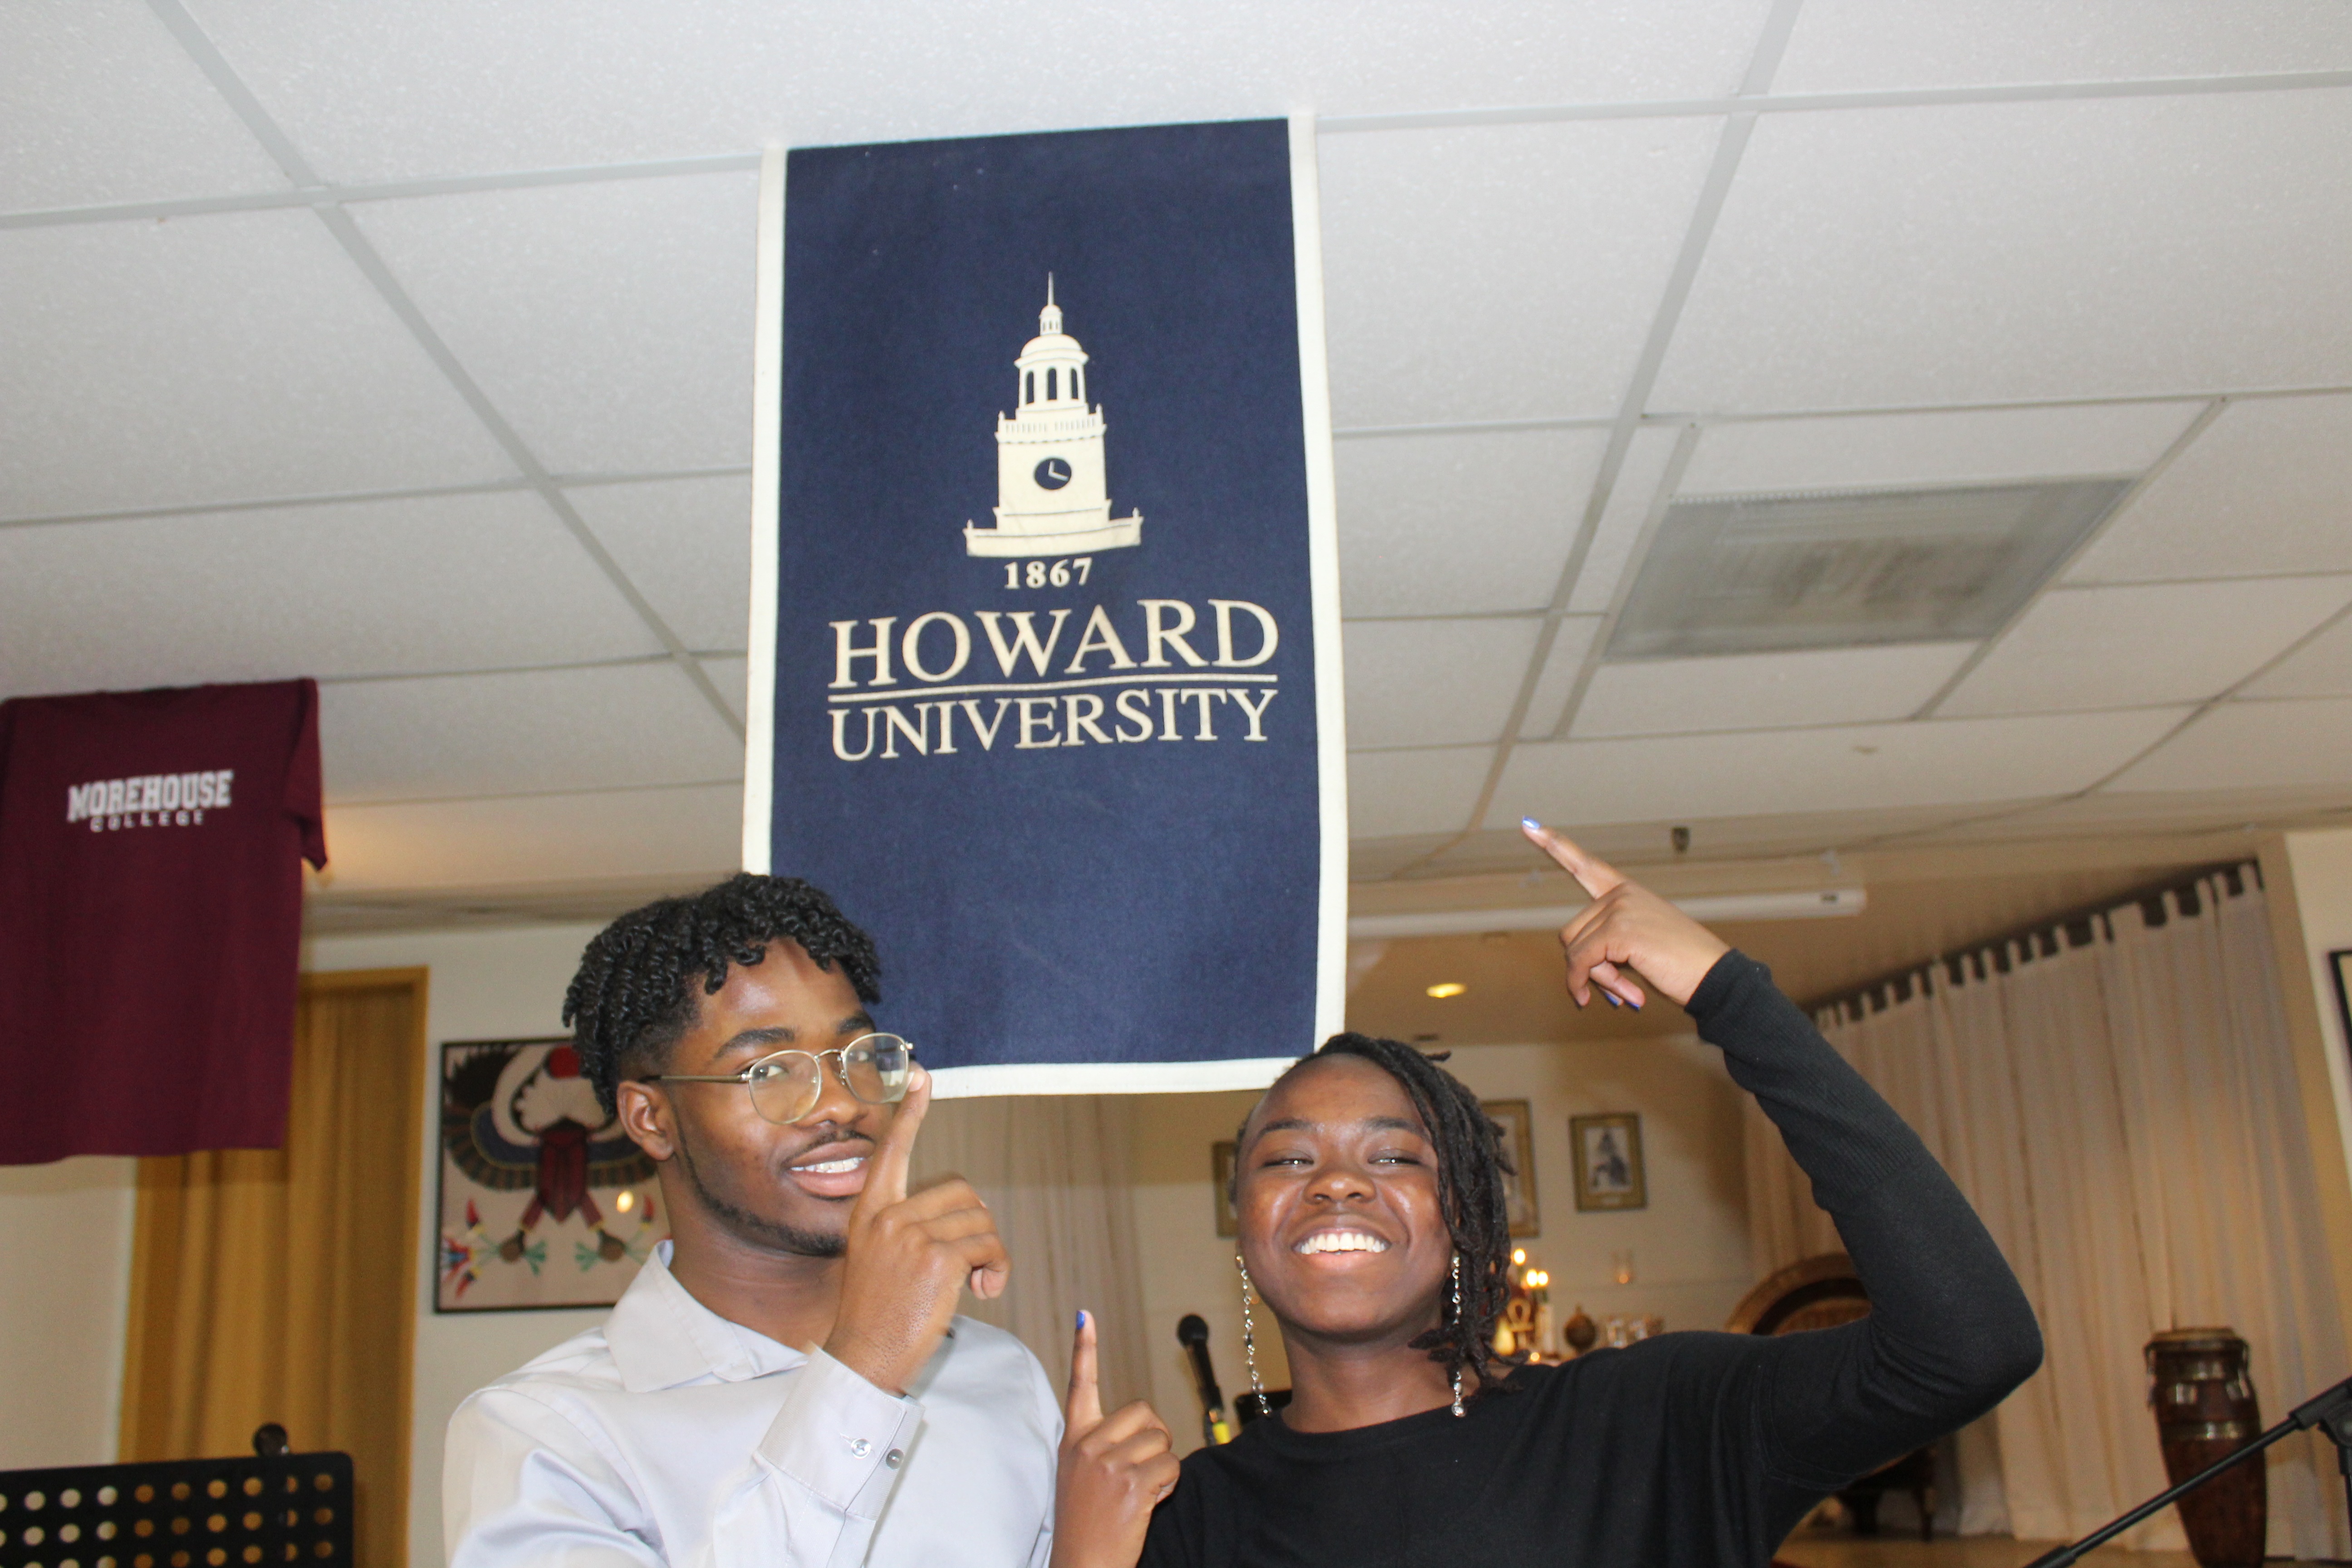 Khukheper and Adeya announcing their decision to attend Howard